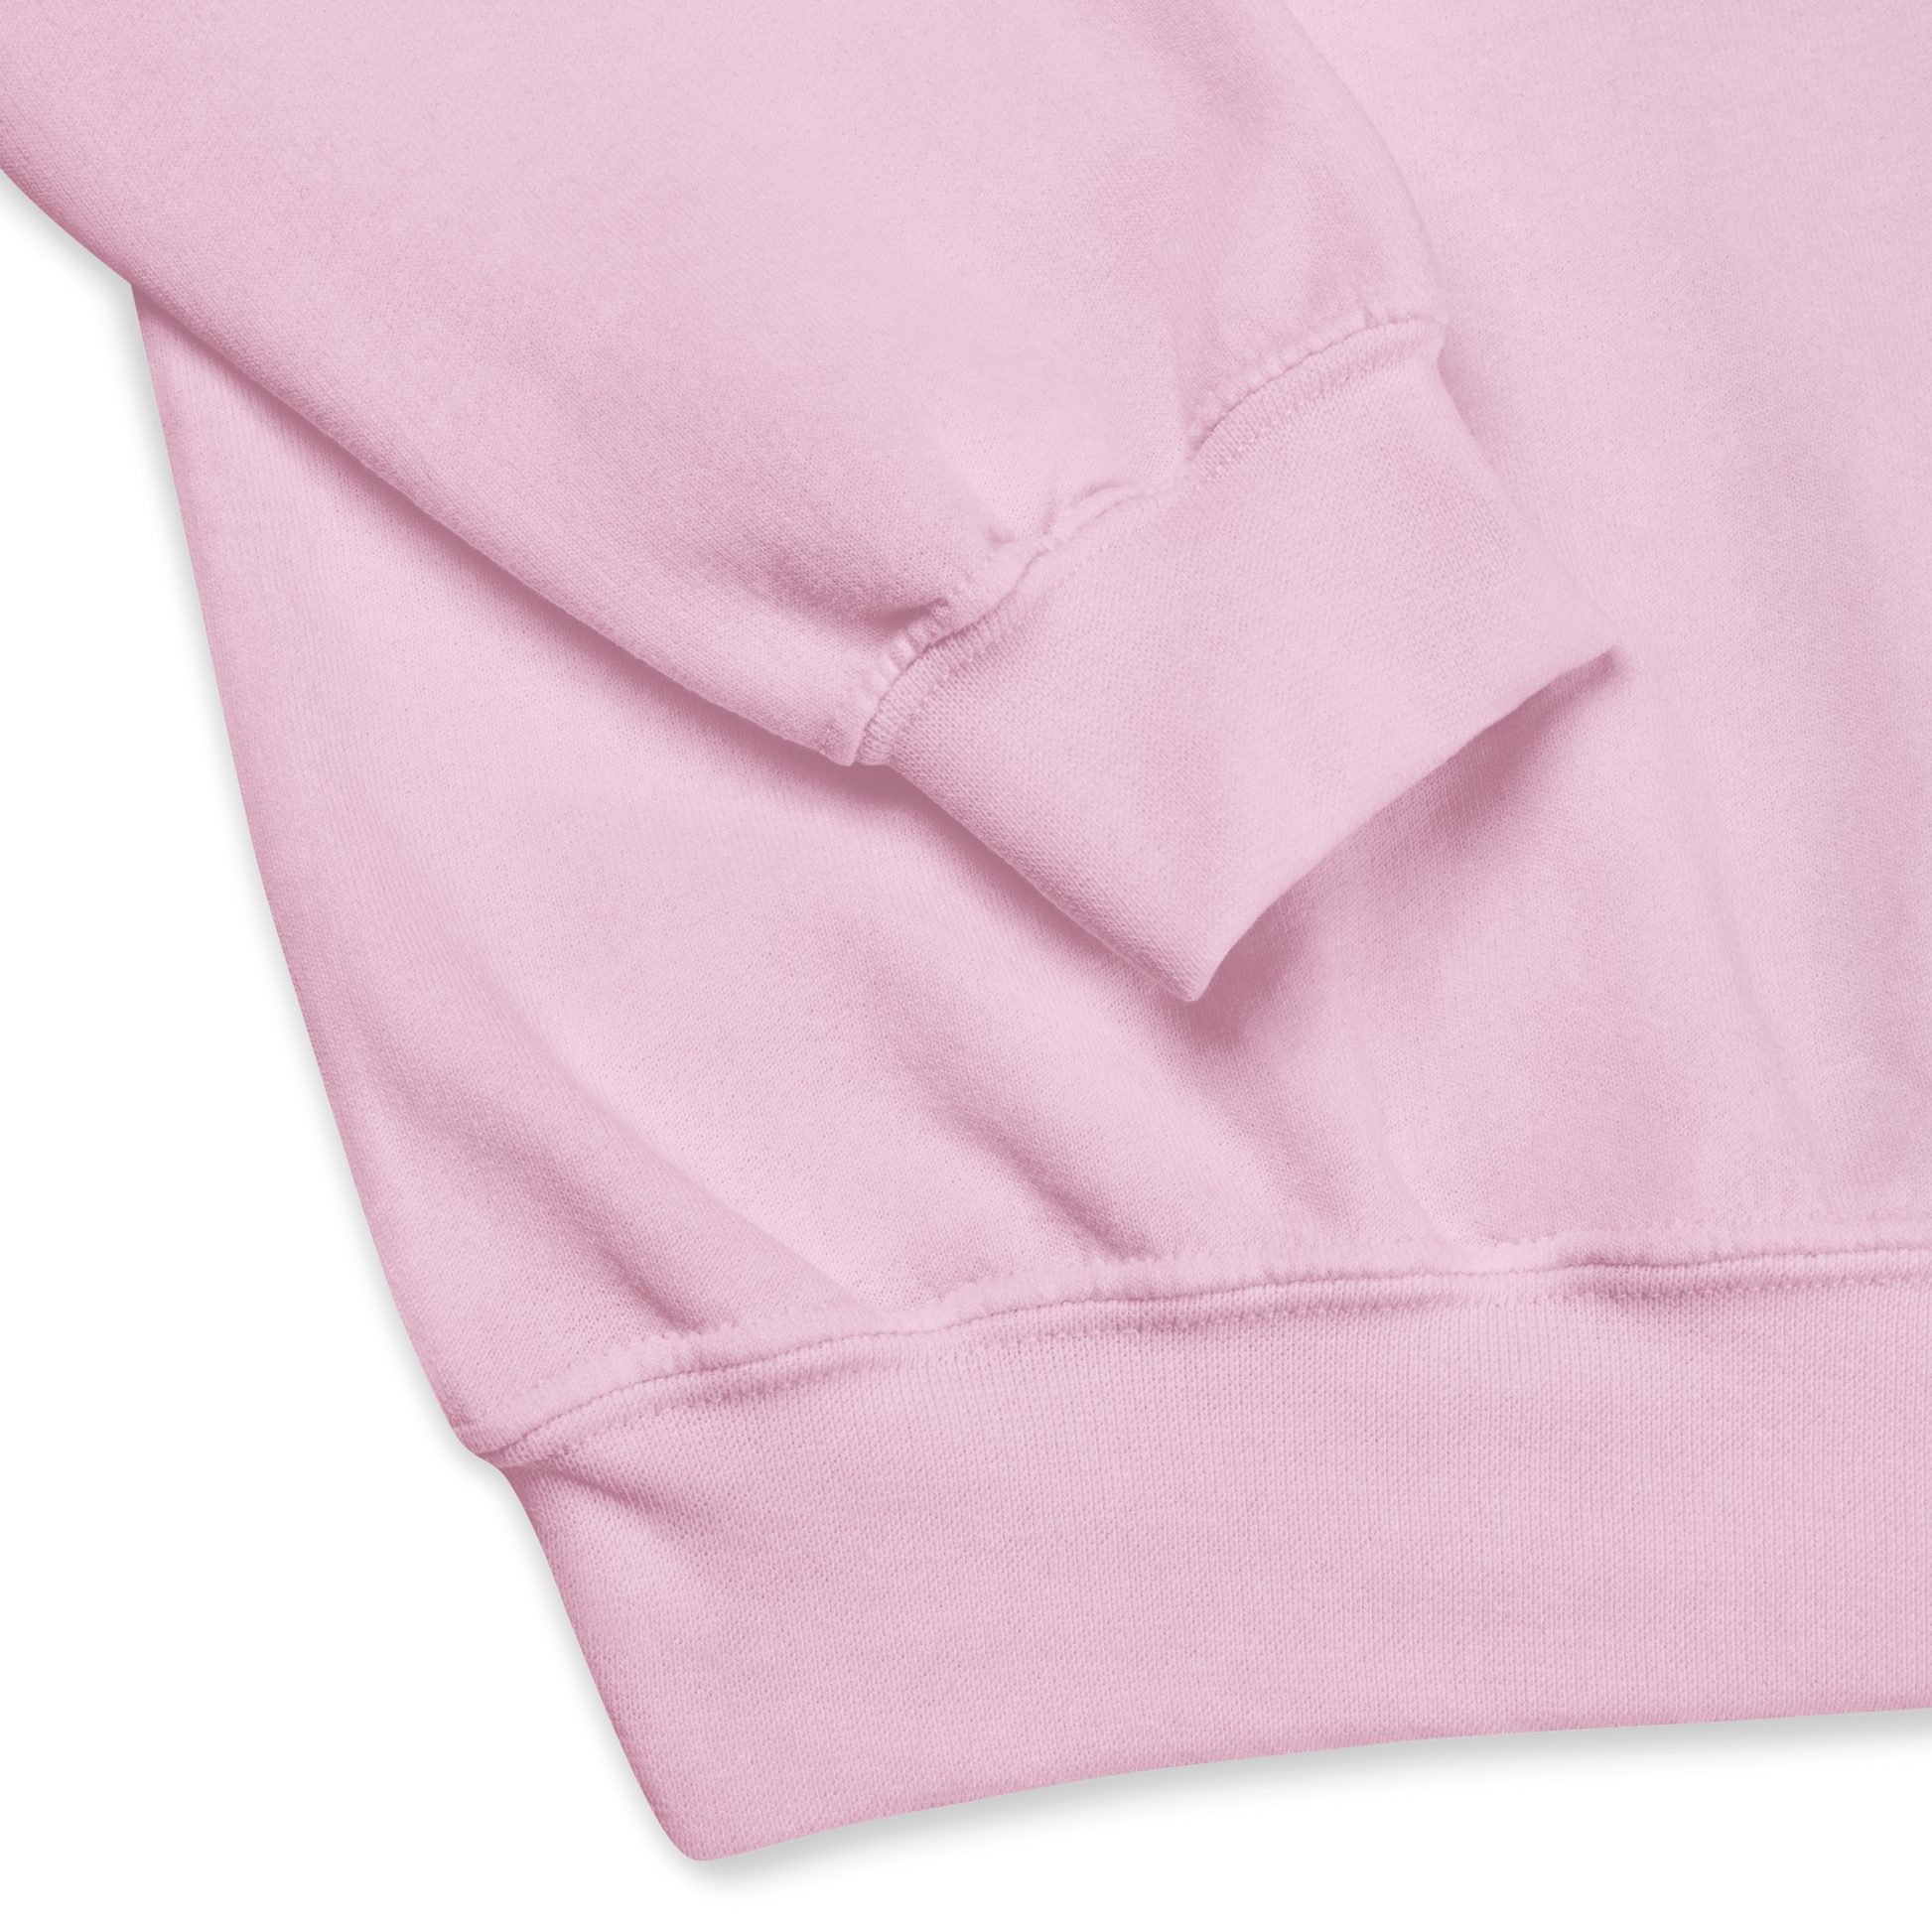 Close details of a Light Pink Panda Sweatshirt featuring an adorable Eat, Sleep, Panda, Repeat graphic on the chest - Funny Graphic Panda Sweatshirts - Boozy Fox